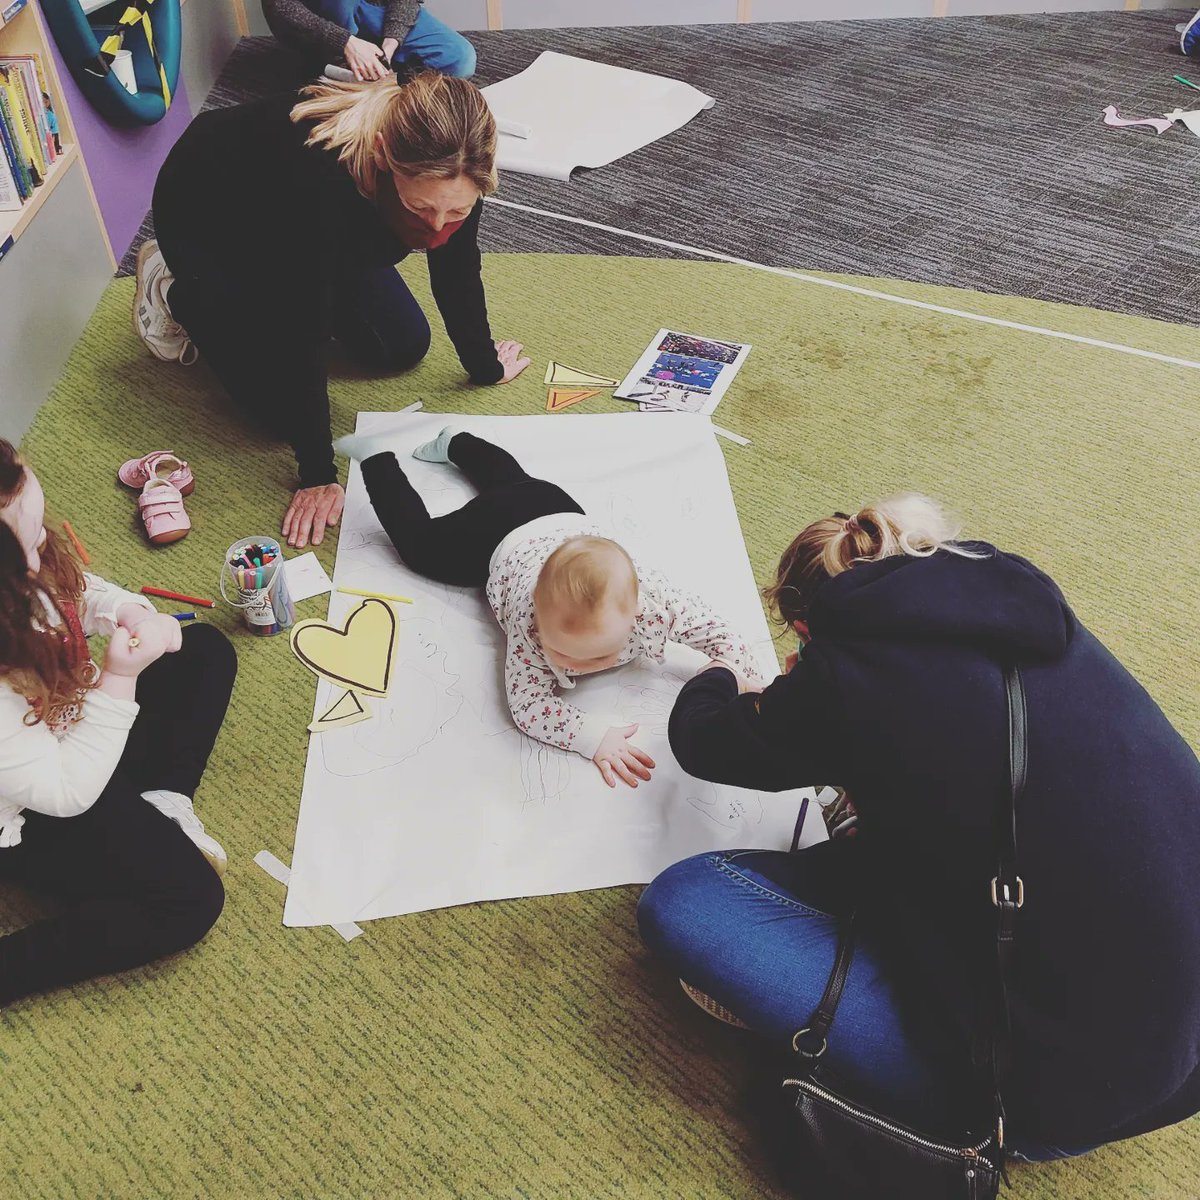 Some great ideas came to life today @WokingLibrary - turning into interactive #WSPlayground and coming to Woking Shopping Centre in April! Did you know you can find one in Camberley and Staines? 😊 @annabruder @wokingcouncil @farnhammaltings @Dance21Surrey